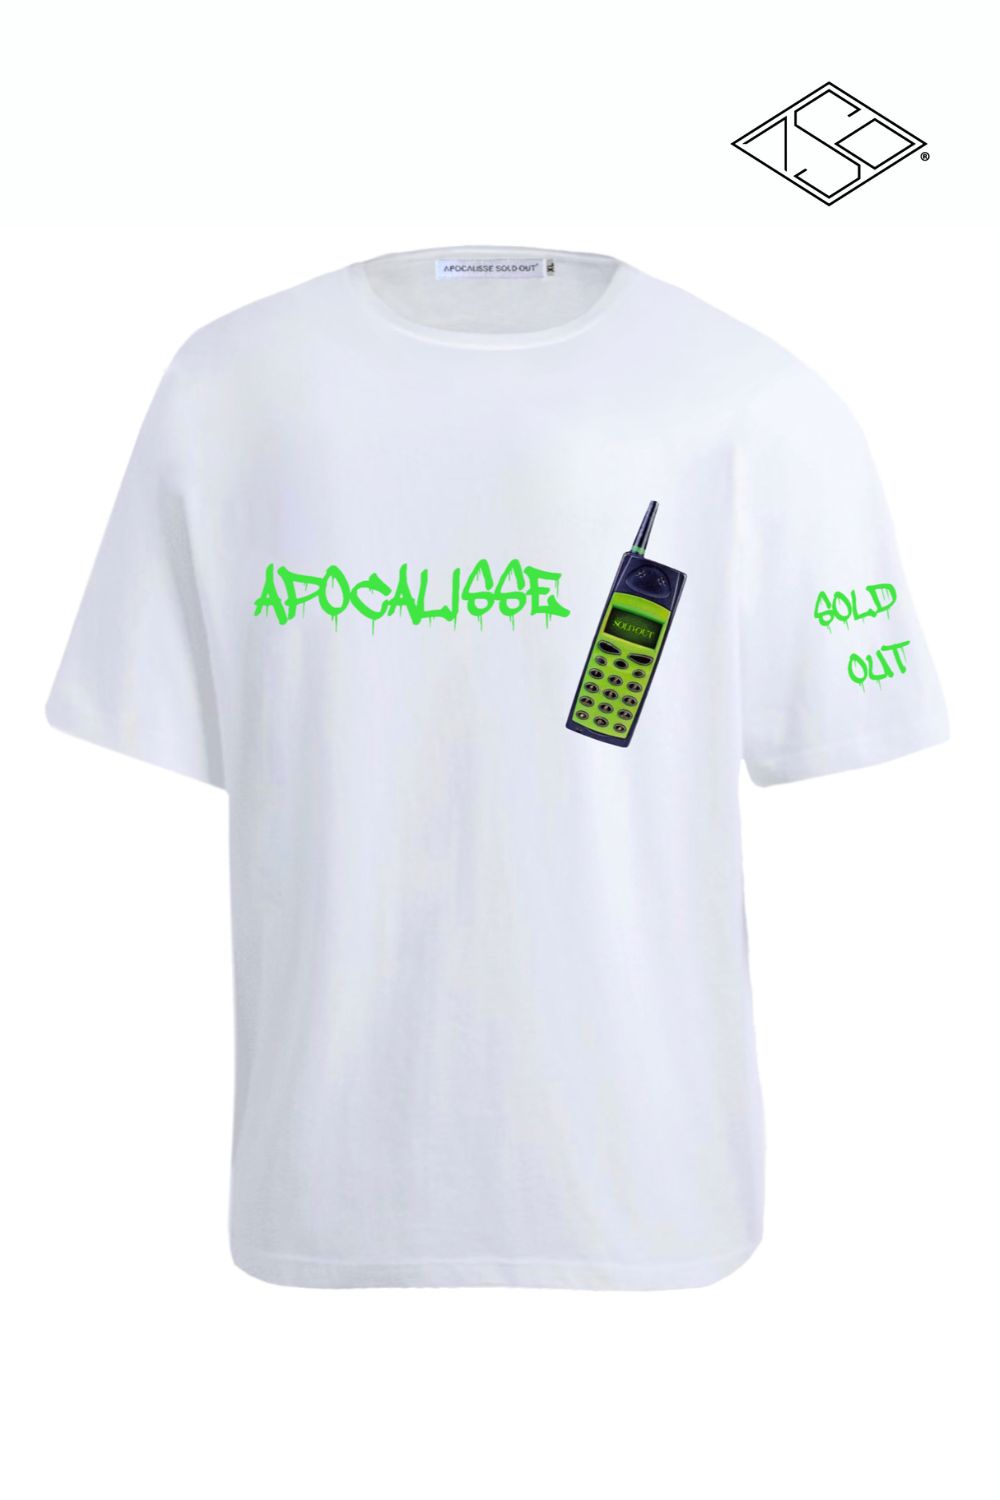 Apocalisse TRAP PHONE by ApocalisseSoldOut® Fashion Brand